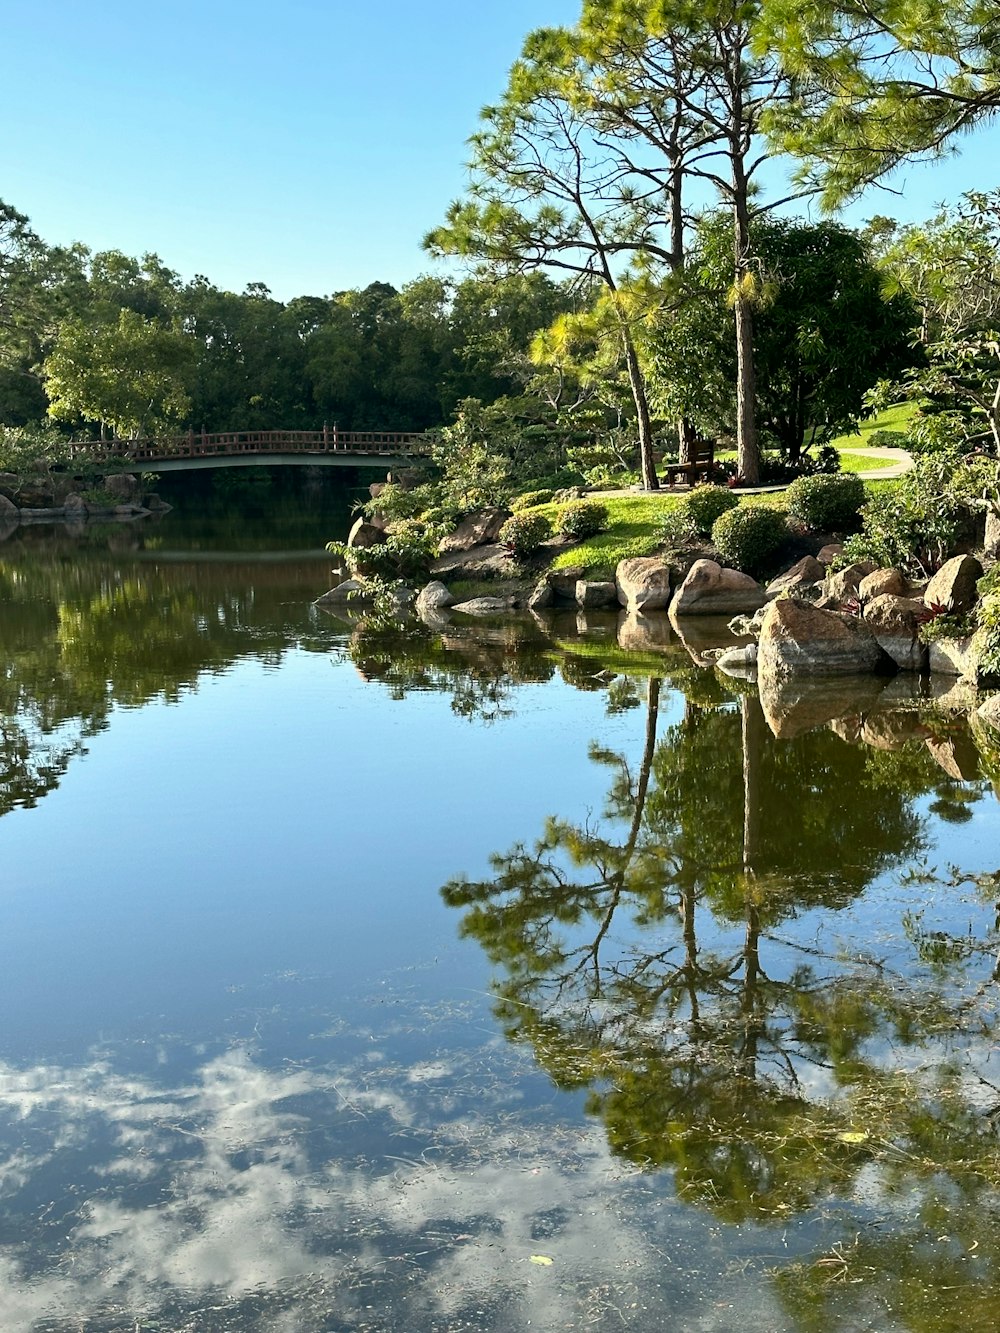 a pond surrounded by rocks and trees with a bridge in the background